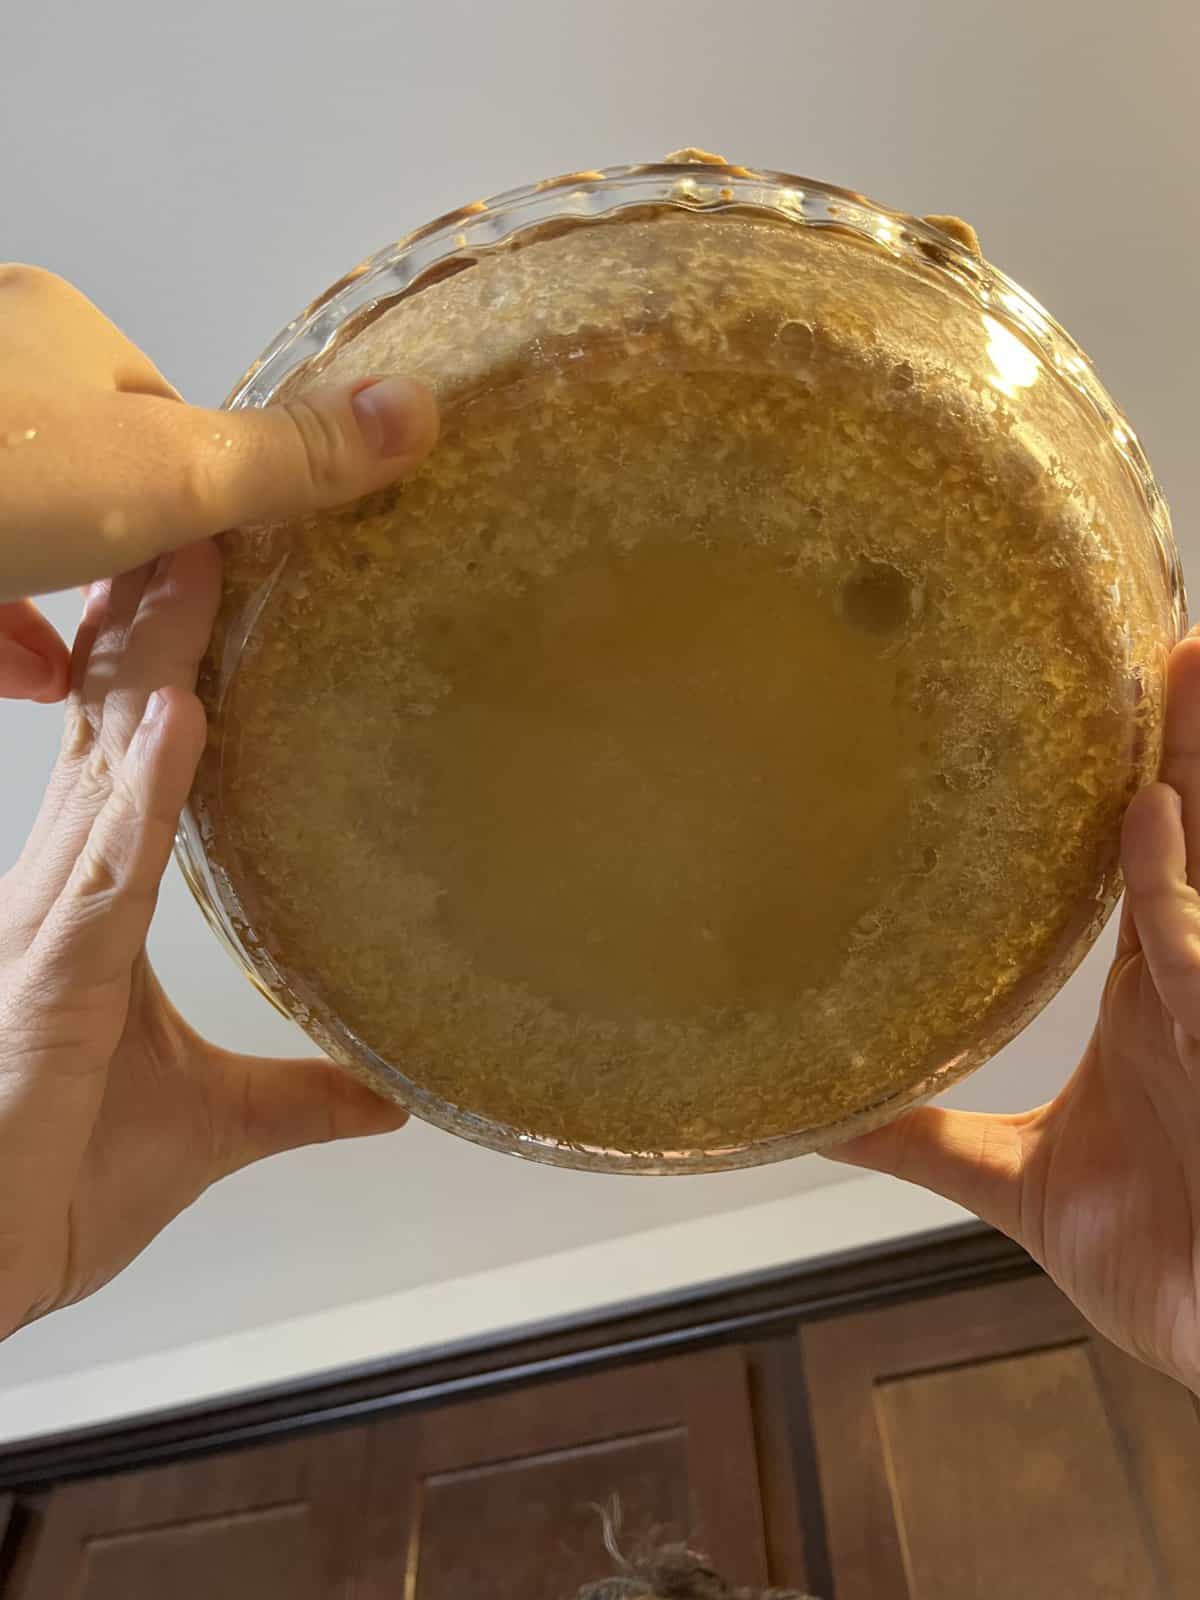 three hands holding up a pie crust in a clear glass pie dish showing it from underneath